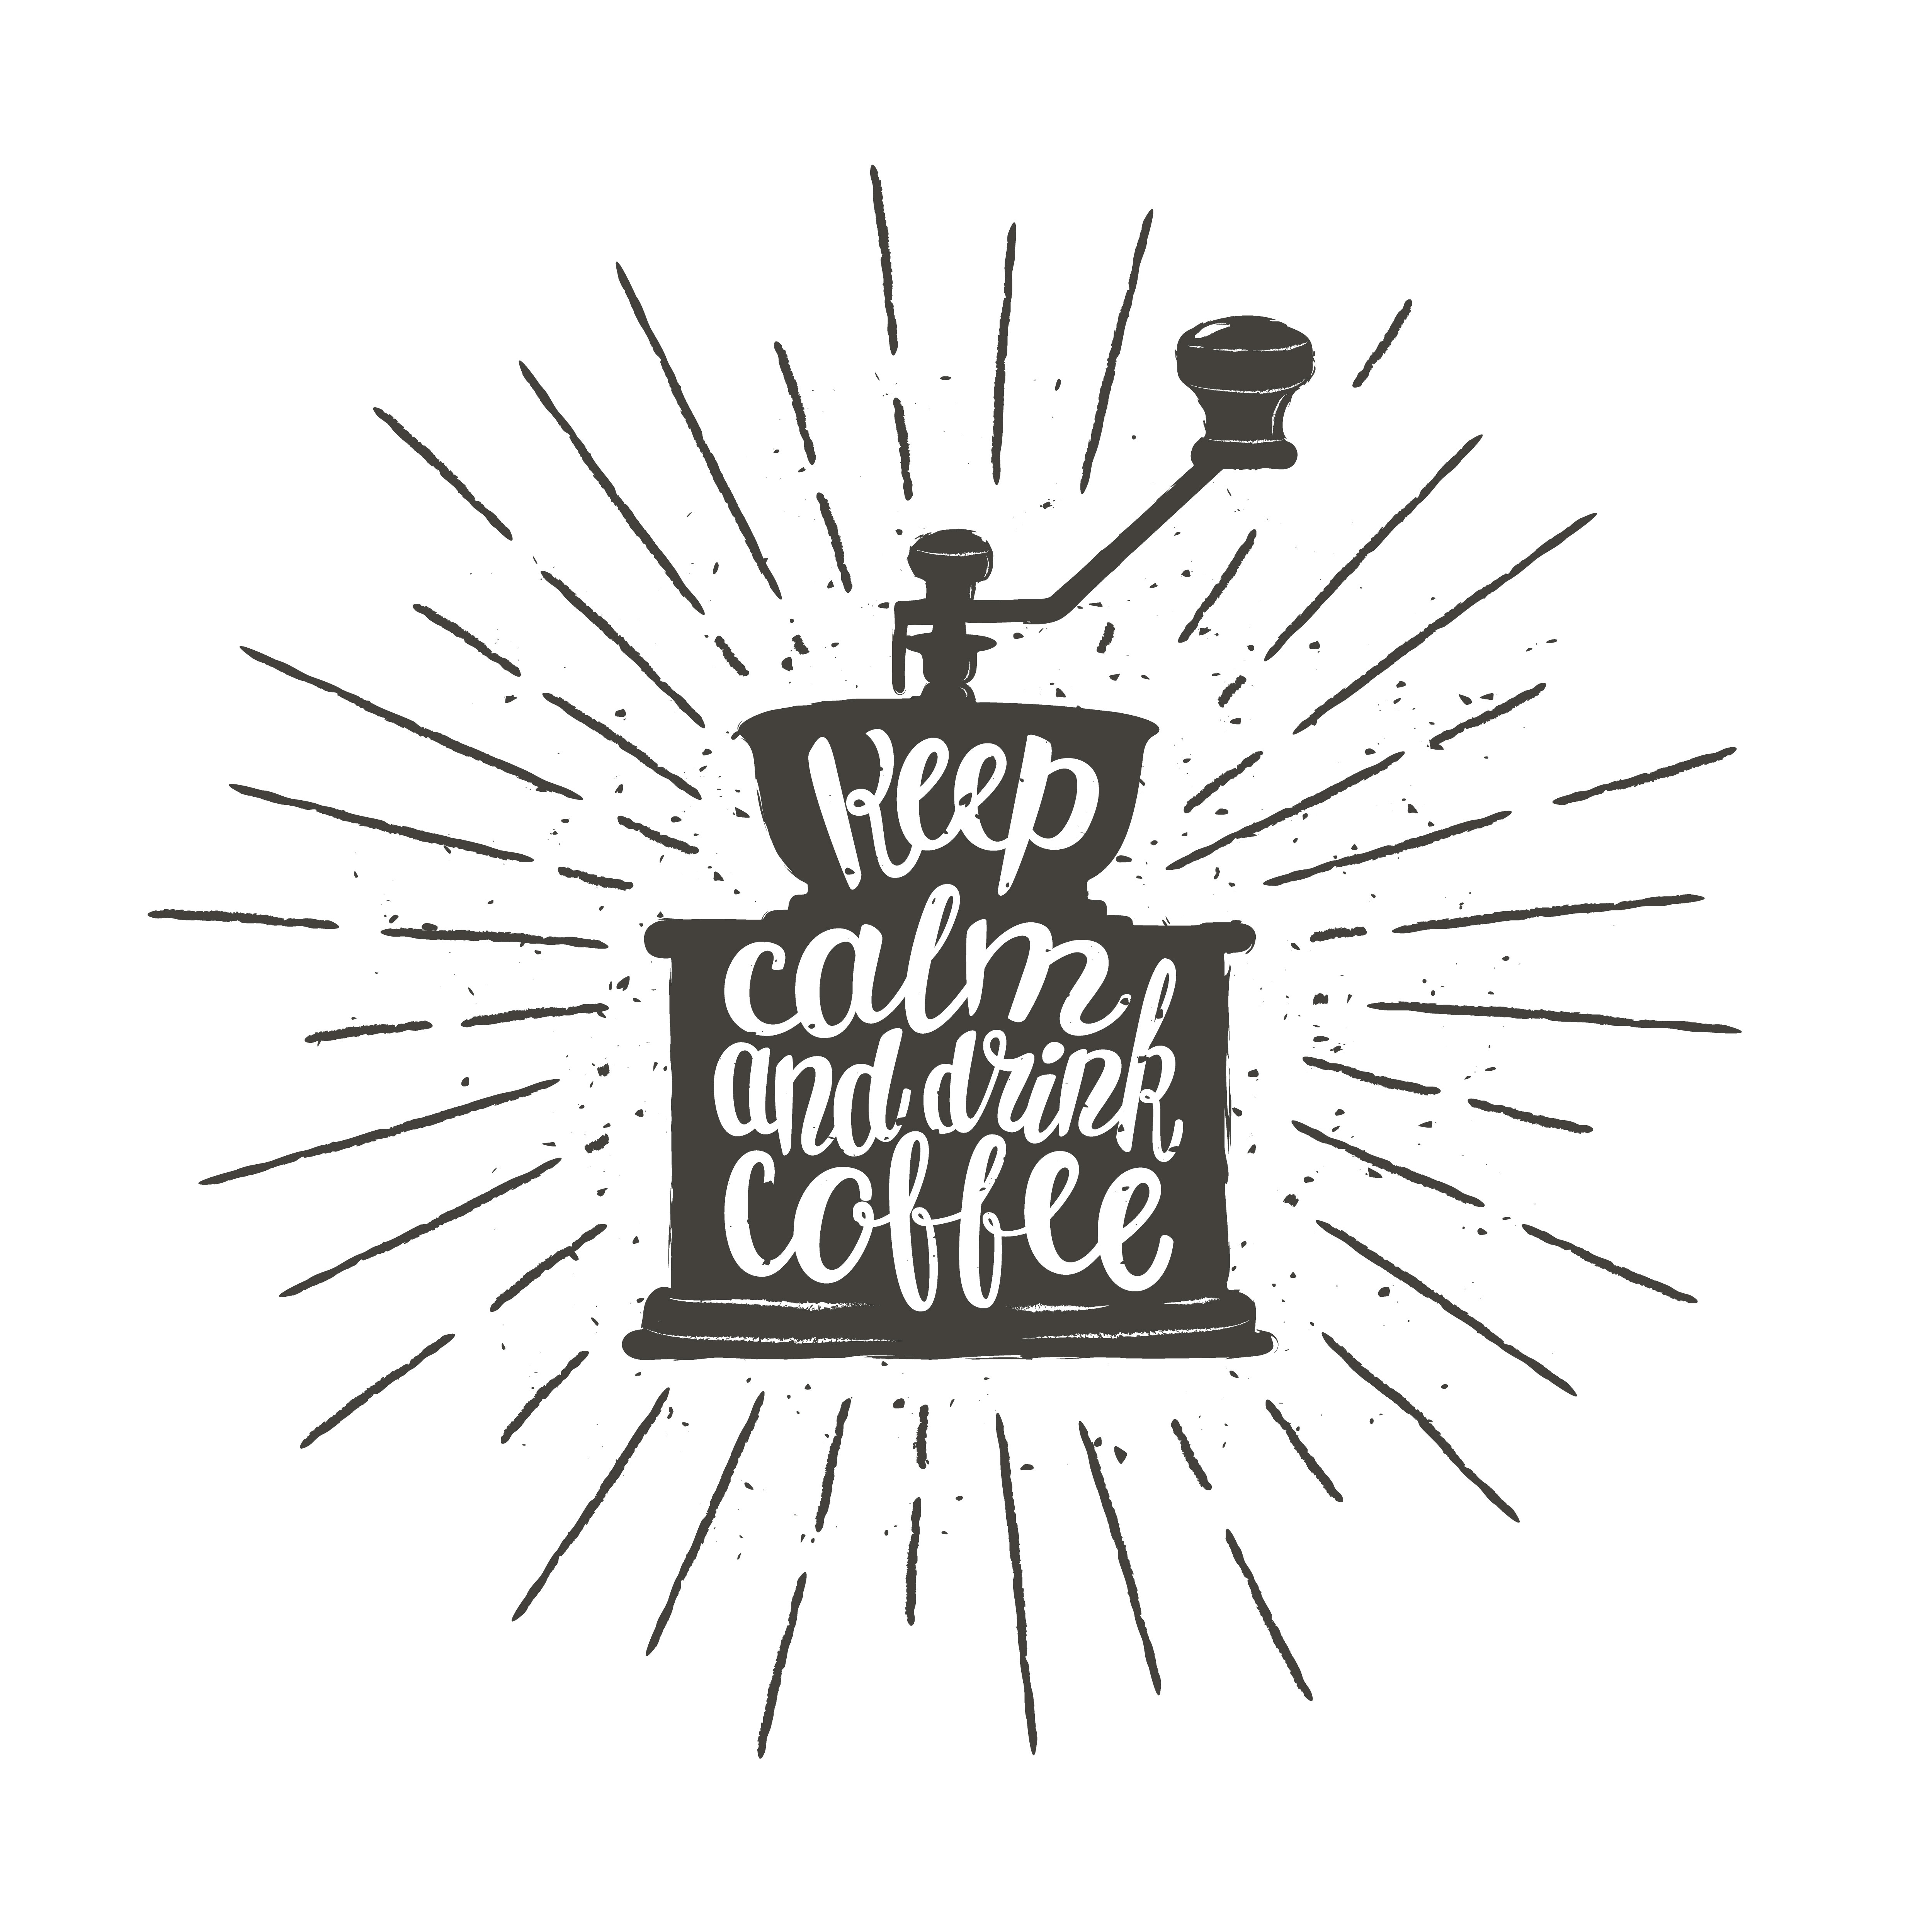 Monochrome vintage coffee grinder silhouette with lettering Keep calm and  drink coffee. Coffee mill with funny quote vector illustration for menu,  coffee shop logo or label, poster, t-shirt print. 616335 Vector Art